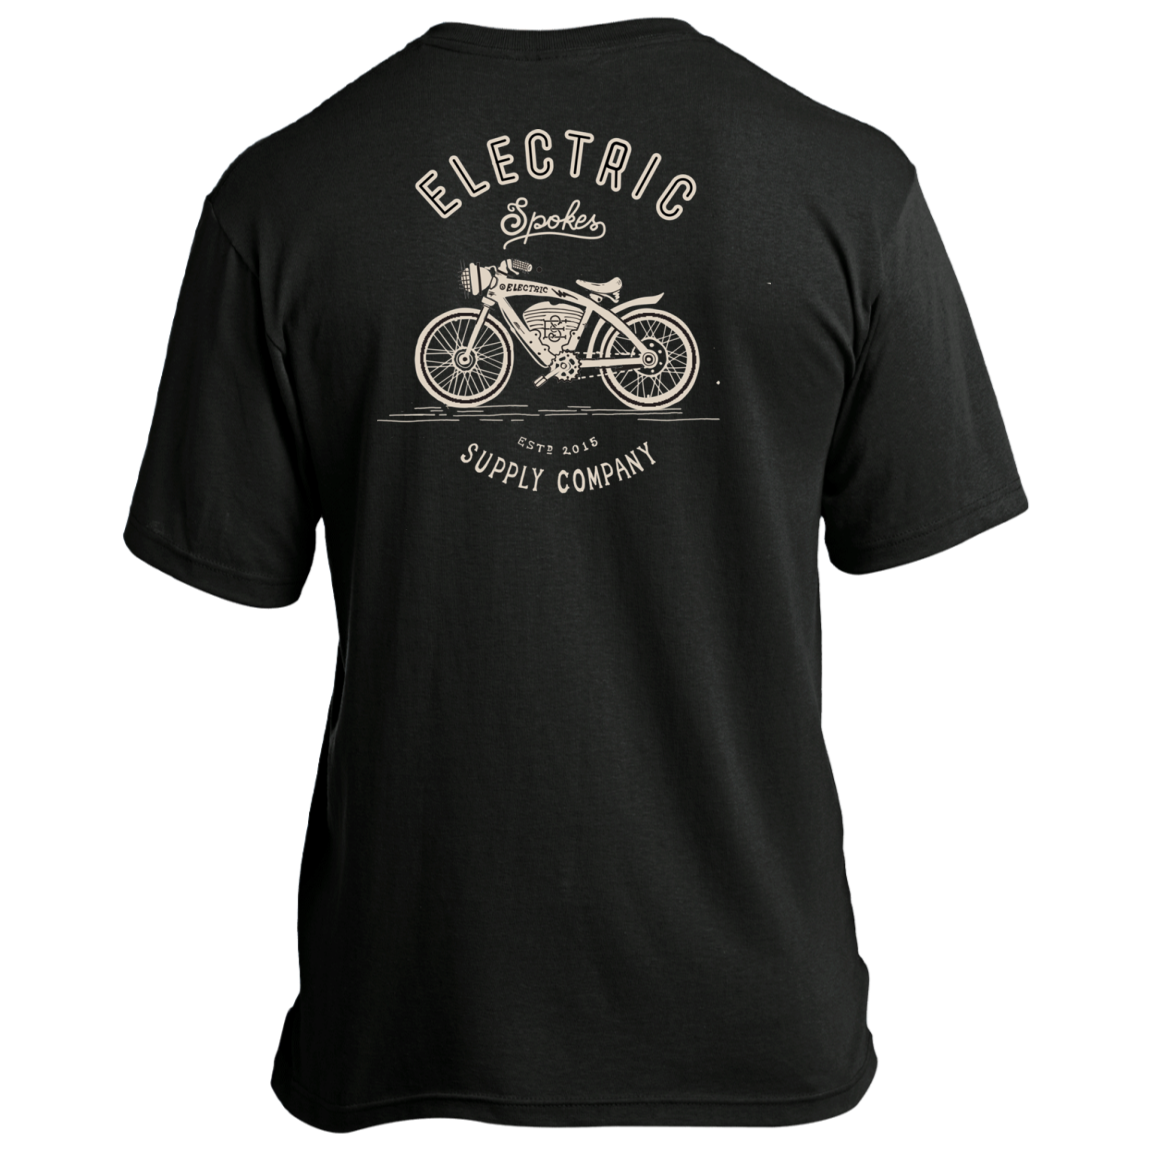 The Voltaire Cycles Apparel Collection-Voltaire Cycles of Central Oregon